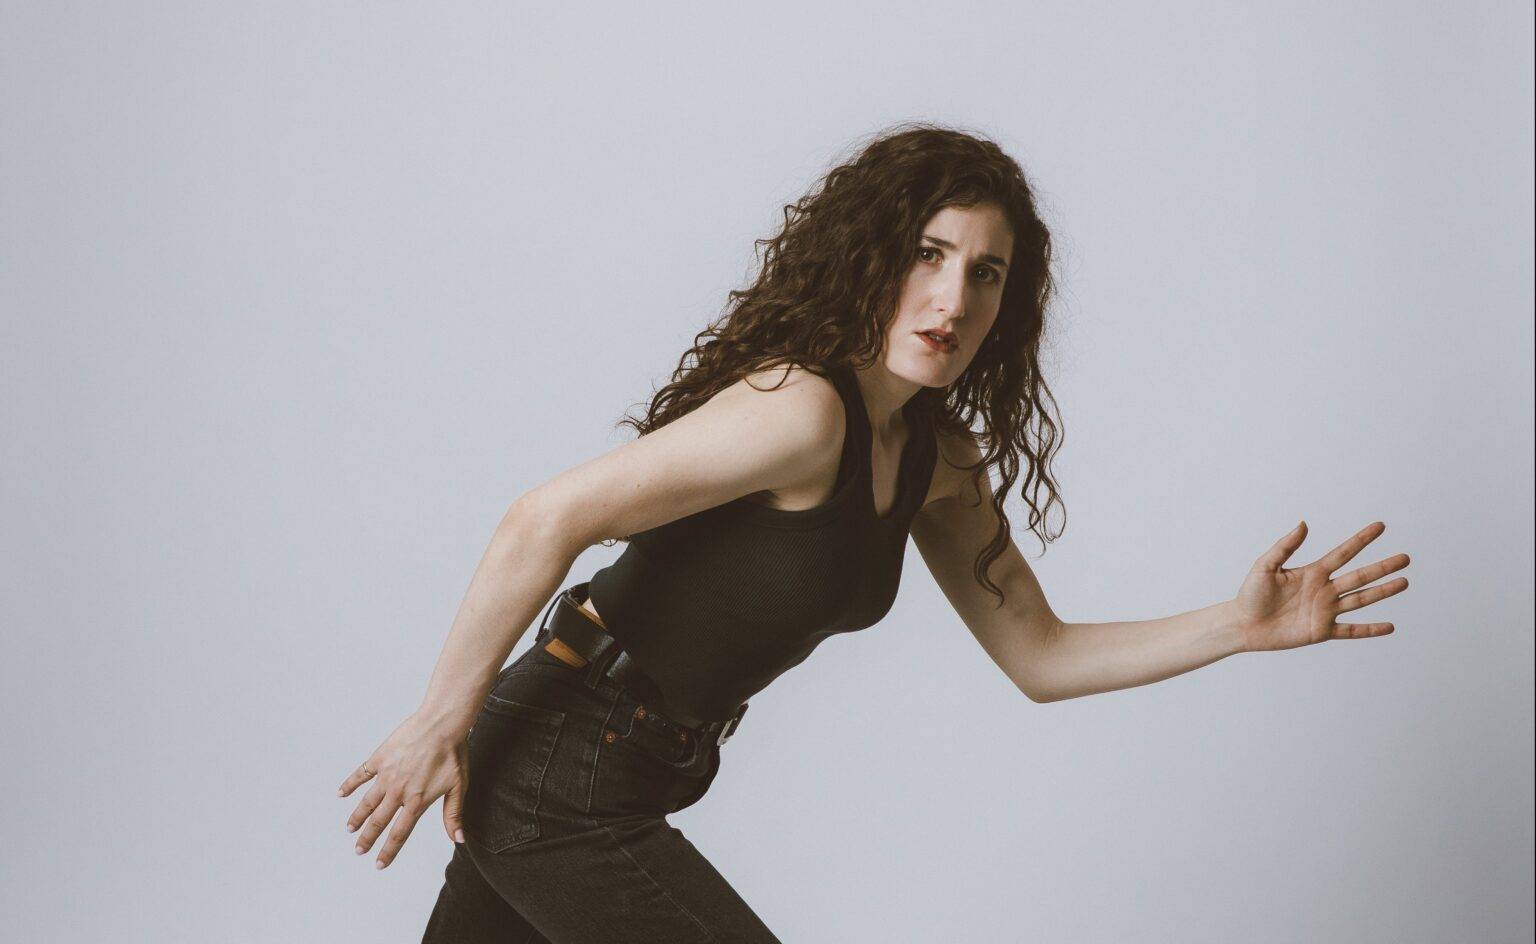 Want to become a comedian? You’re on your own, says Kate Berlant